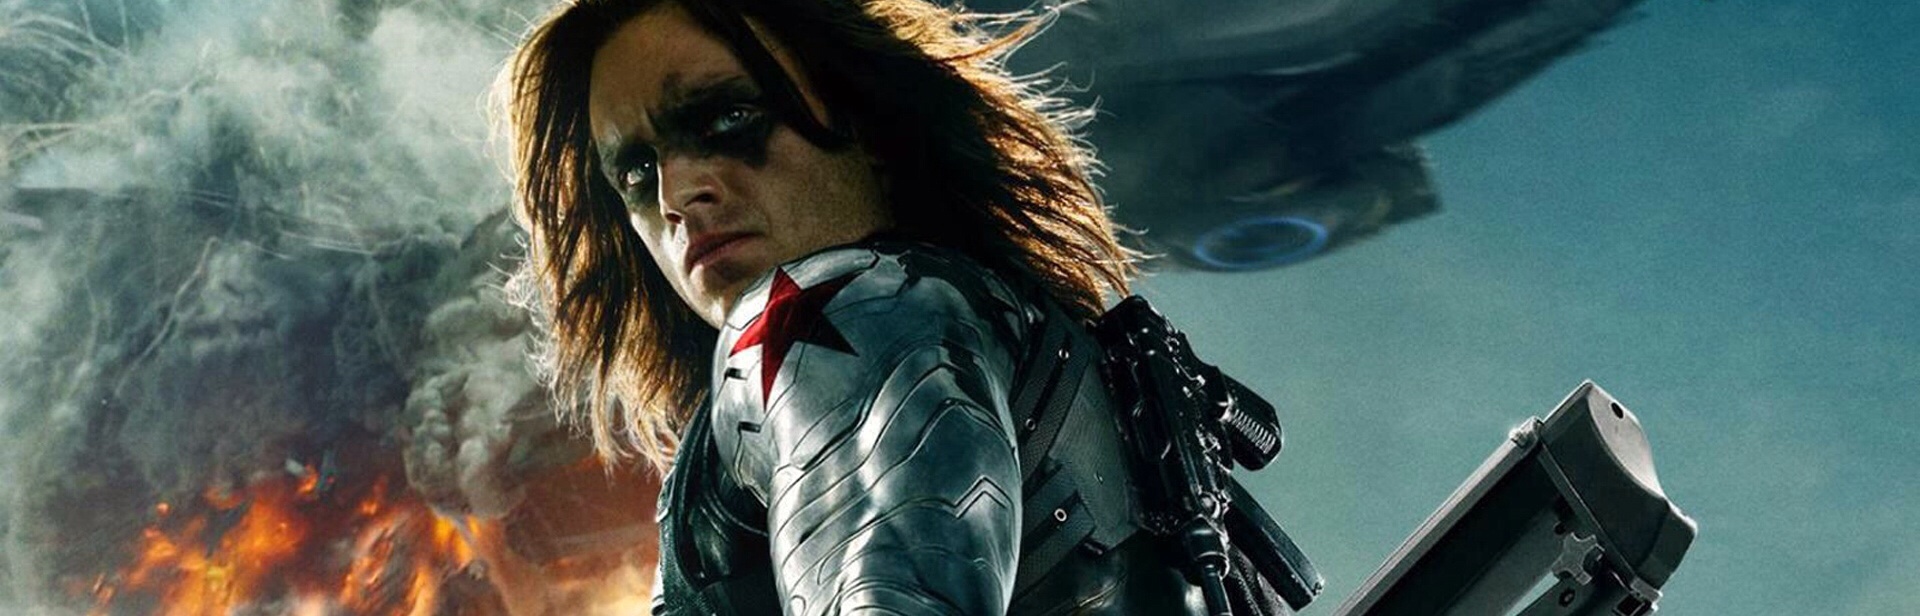 CAPTAIN AMERICA: THE WINTER SOLDIER Blu-ray Steelbook is releasing at the end of November!